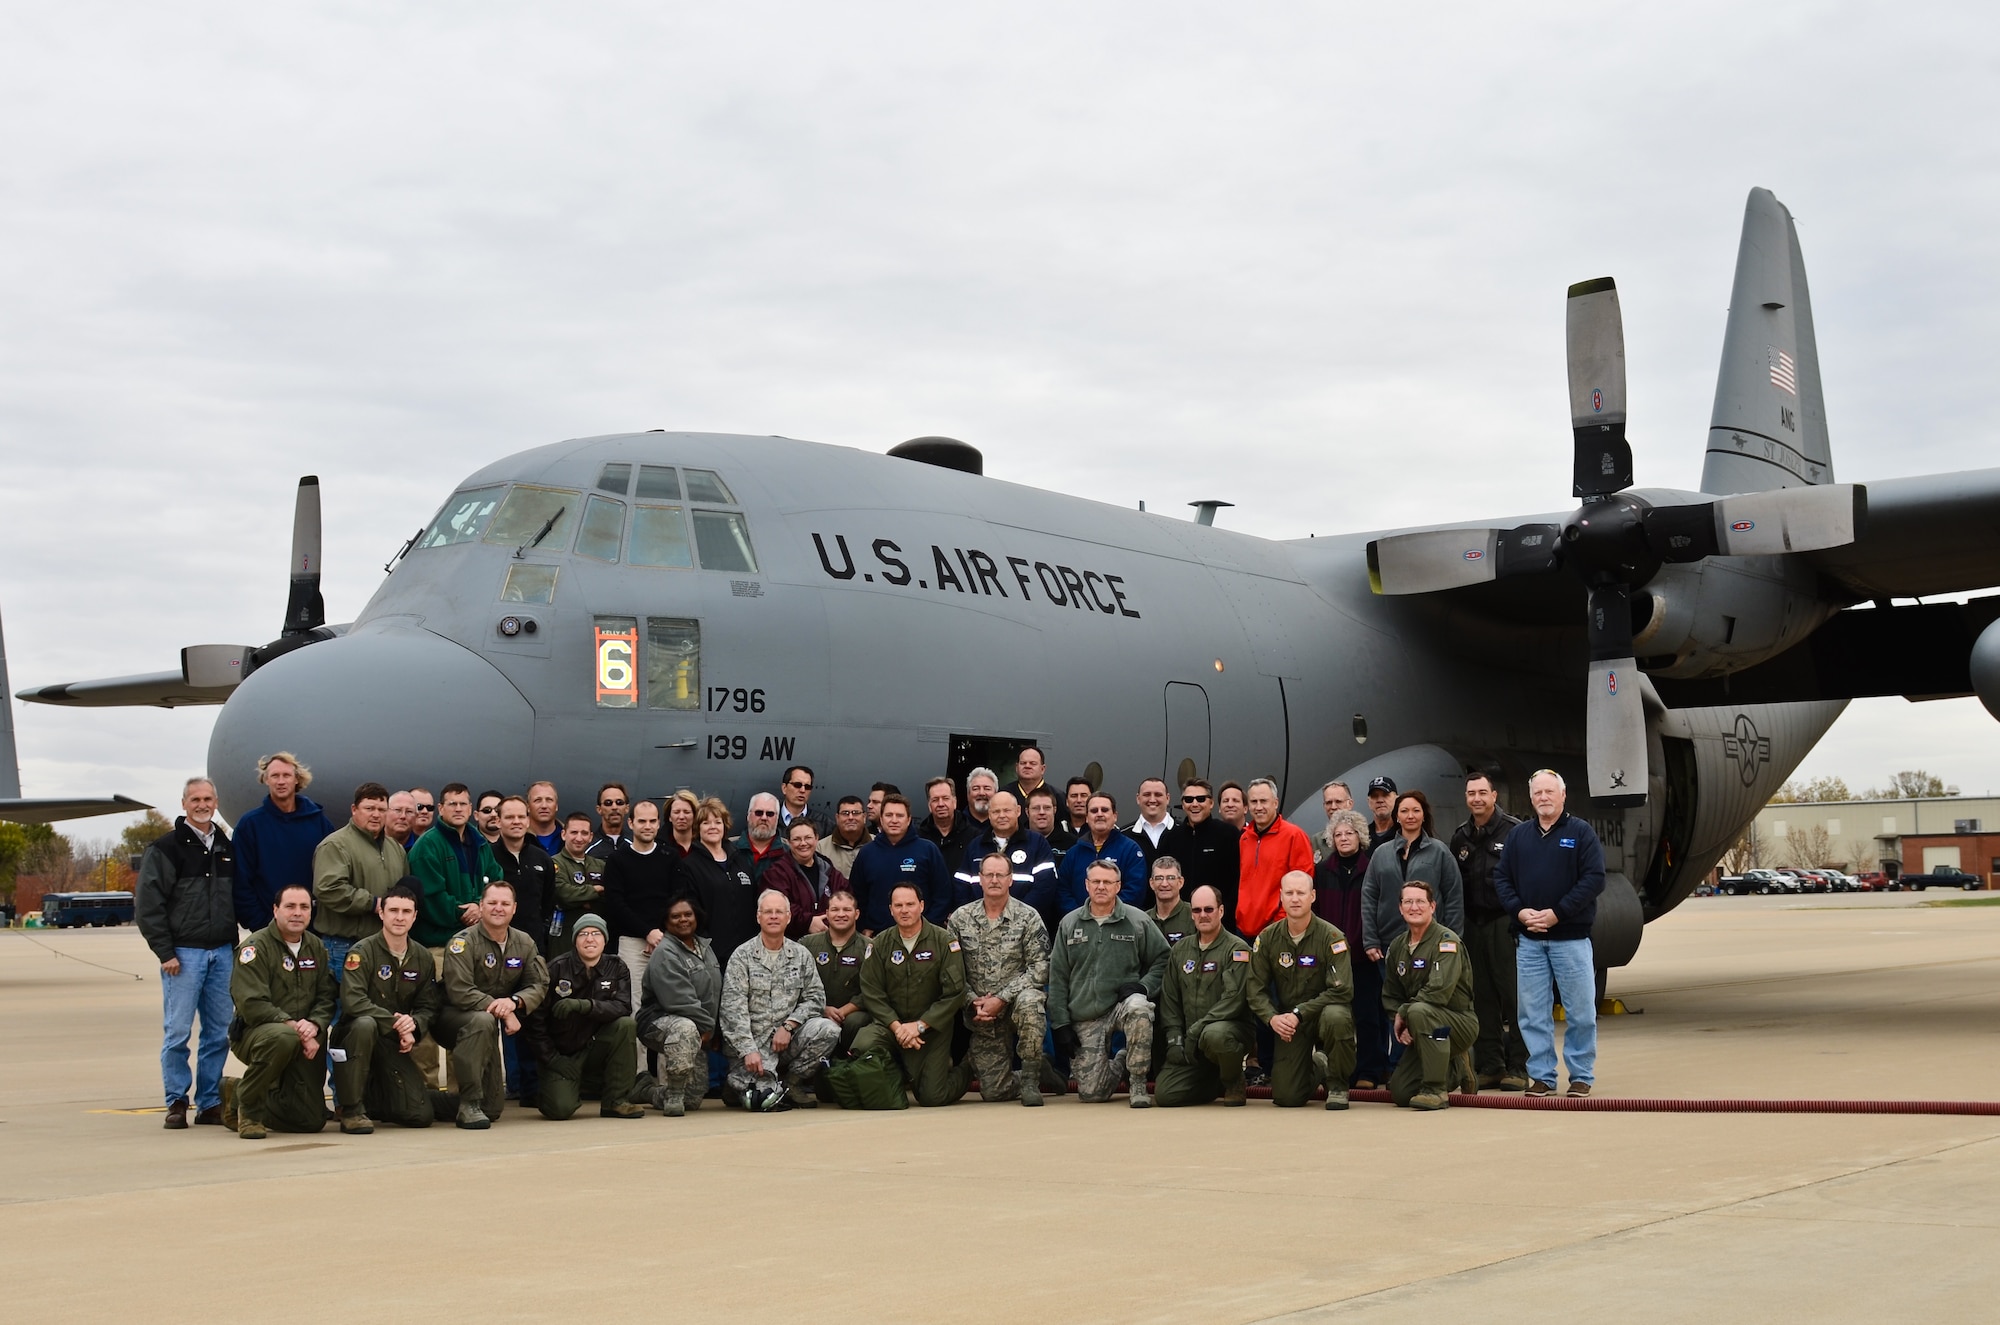 Various employers of National Guard members pose for a photo at Rosecrans Air National Guard Base, St. Joseph, Mo., Oct. 18, 2012. The employers received a flight in a C-130 “Hercules” cargo aircraft and an orientation about the mission of the 139th Airlift Wing. (Missouri Air National Guard photo by Staff Sgt. Michael Crane)